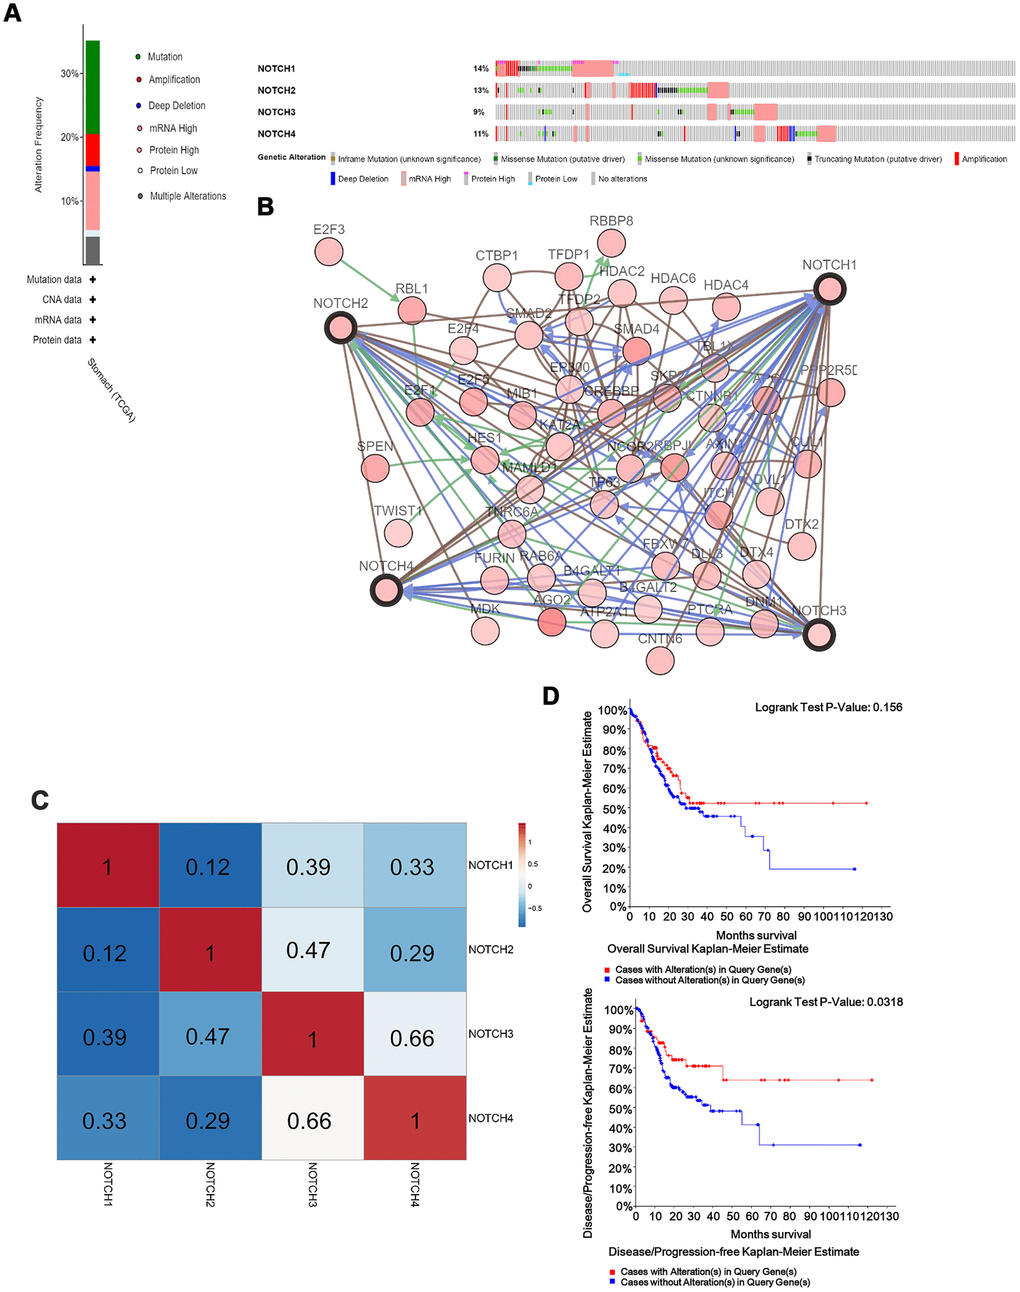 Notch genes expression and mutation analysis in GC. (A) Notch1, Notch2, Notch3 and Notch4 mutation rates were 14%, 13%, 9% and 11%, respectively. (B) Network for 4 Notch receptors and the 50 most frequently altered neighbor genes. (C) Genetic alterations in Notch receptor were correlated with longer DFS in gastric adenocarcinoma patients. (D) The relationship between genetic alterations in Notch and OS/DFS. Logrank test was used in analysis of OS/DFS.